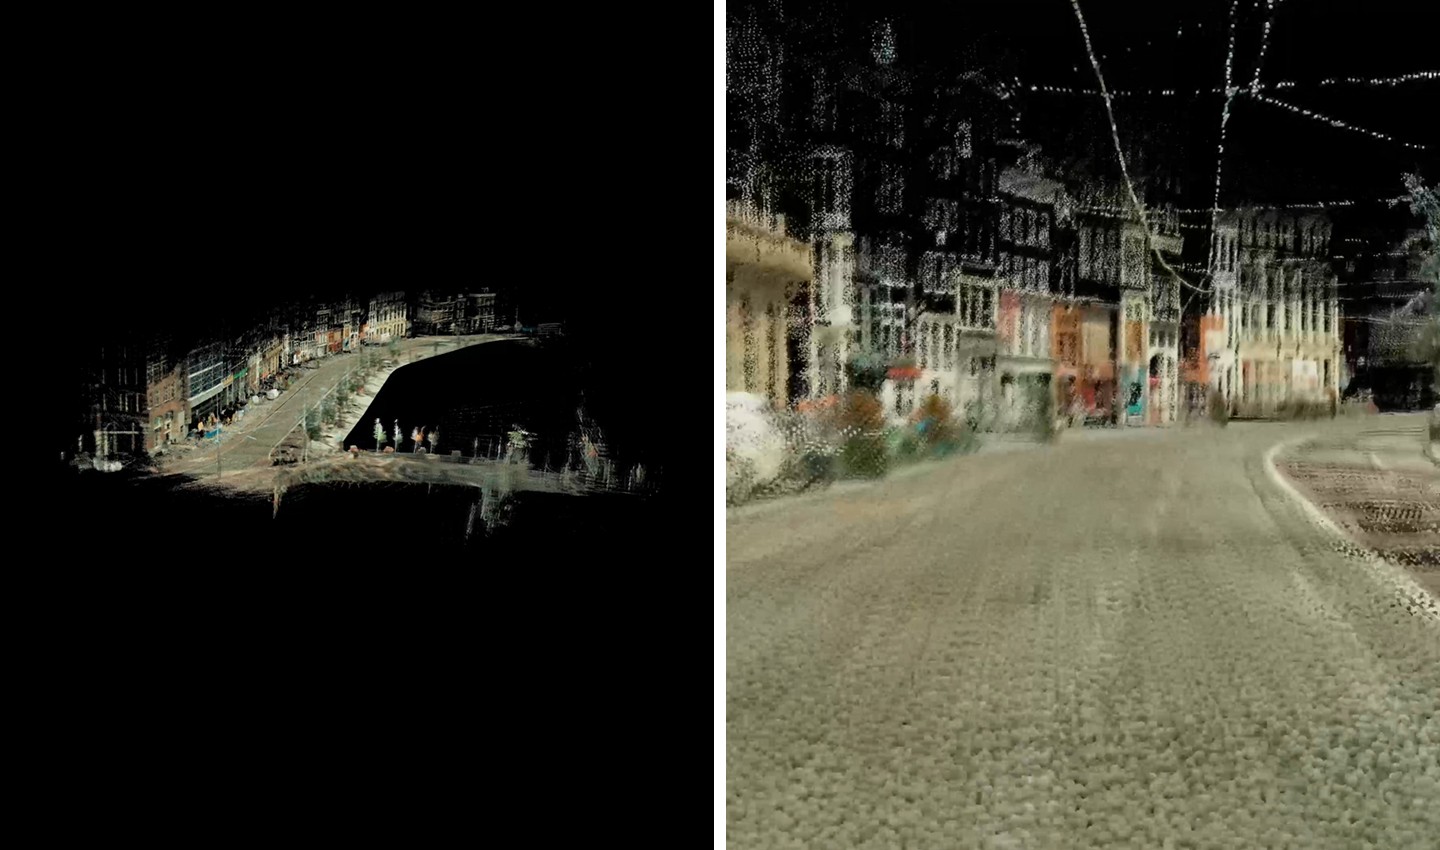 A 3D representation of a mobile mapping vehicle LiDAR capture